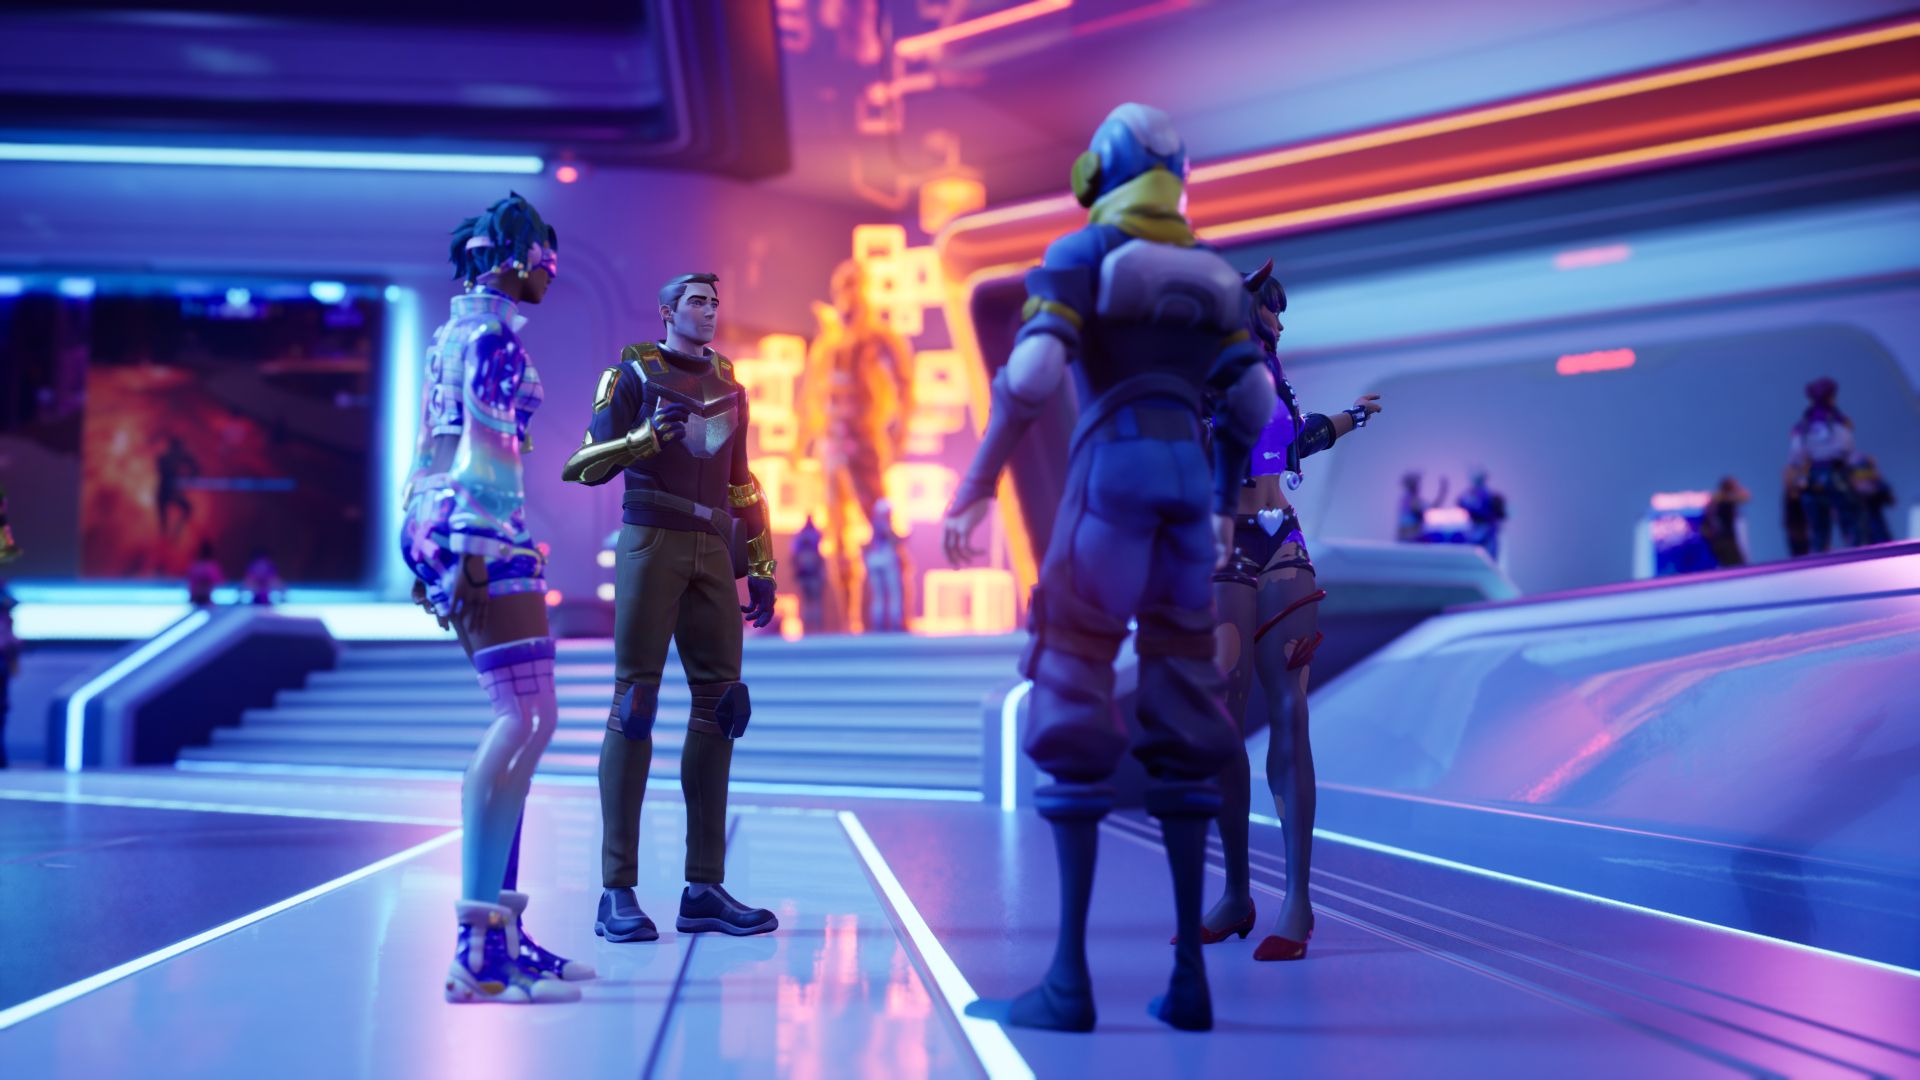 Four characters are seen standing in a neon-lit and futuristic looking lobby conversing towards each other while other players are seen chatting behind them.